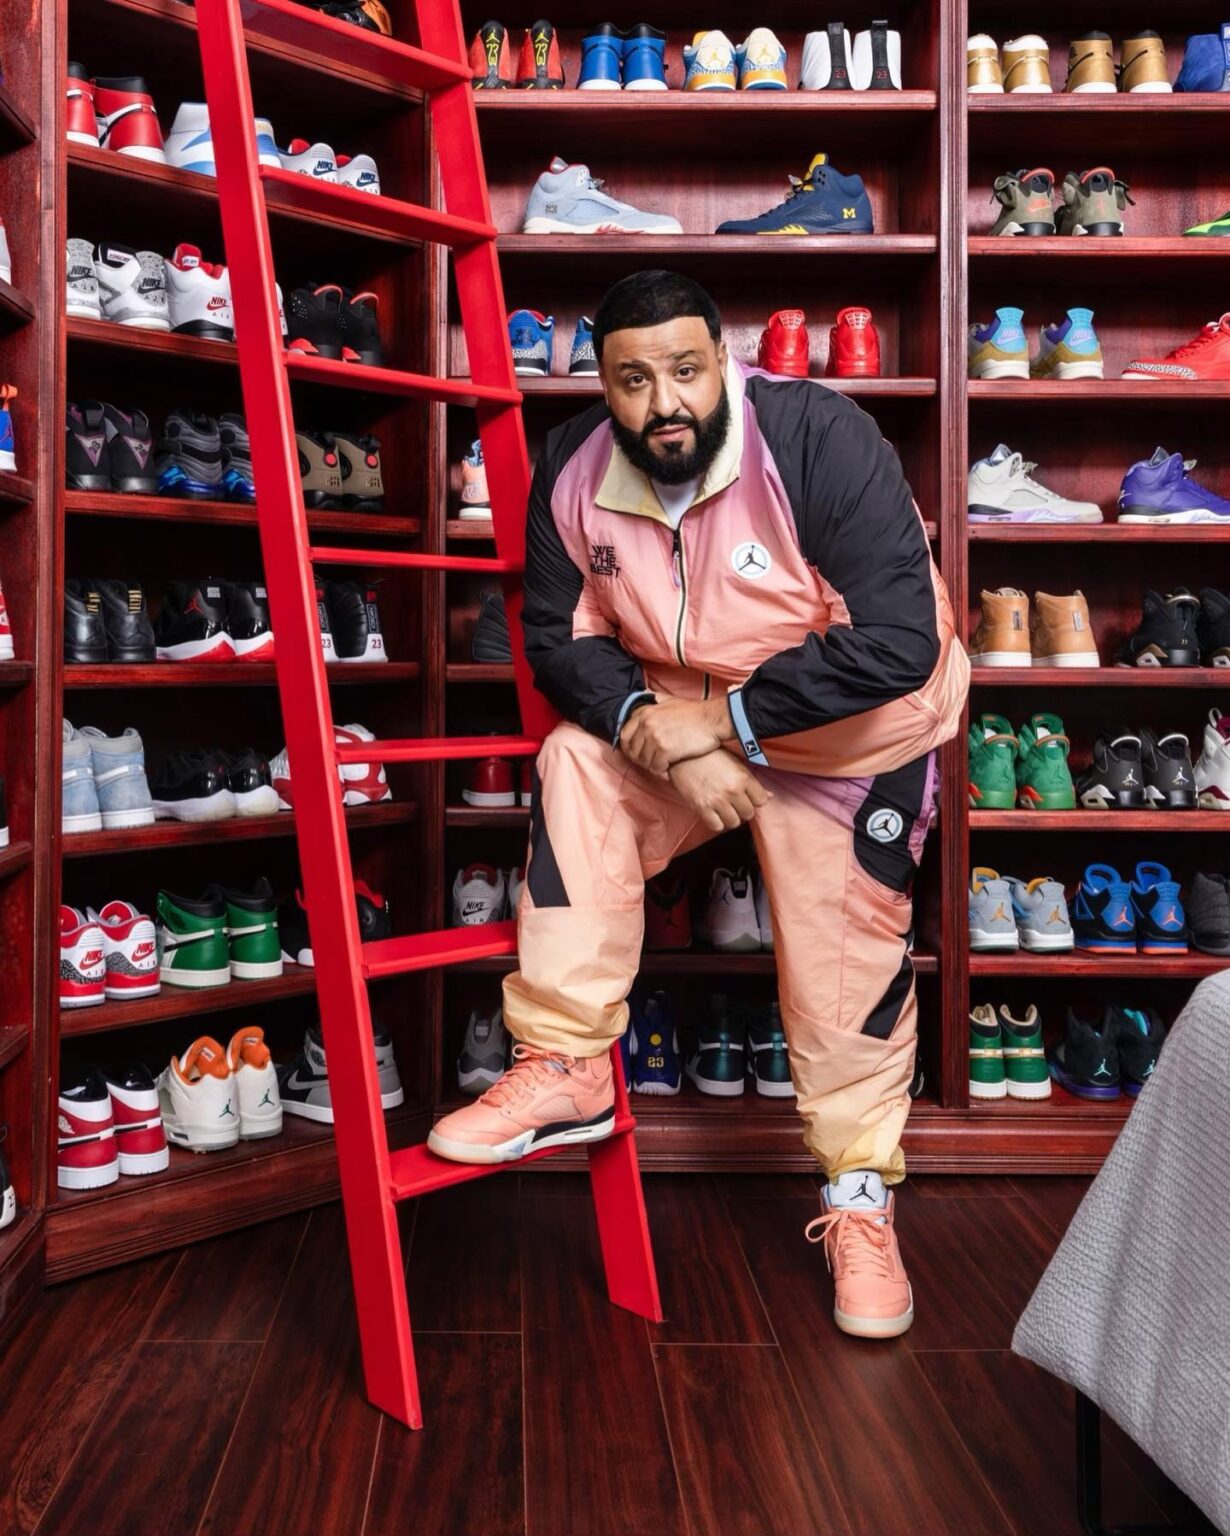 Overwhelmed with the true value of expensive items that DJ Khaled owns